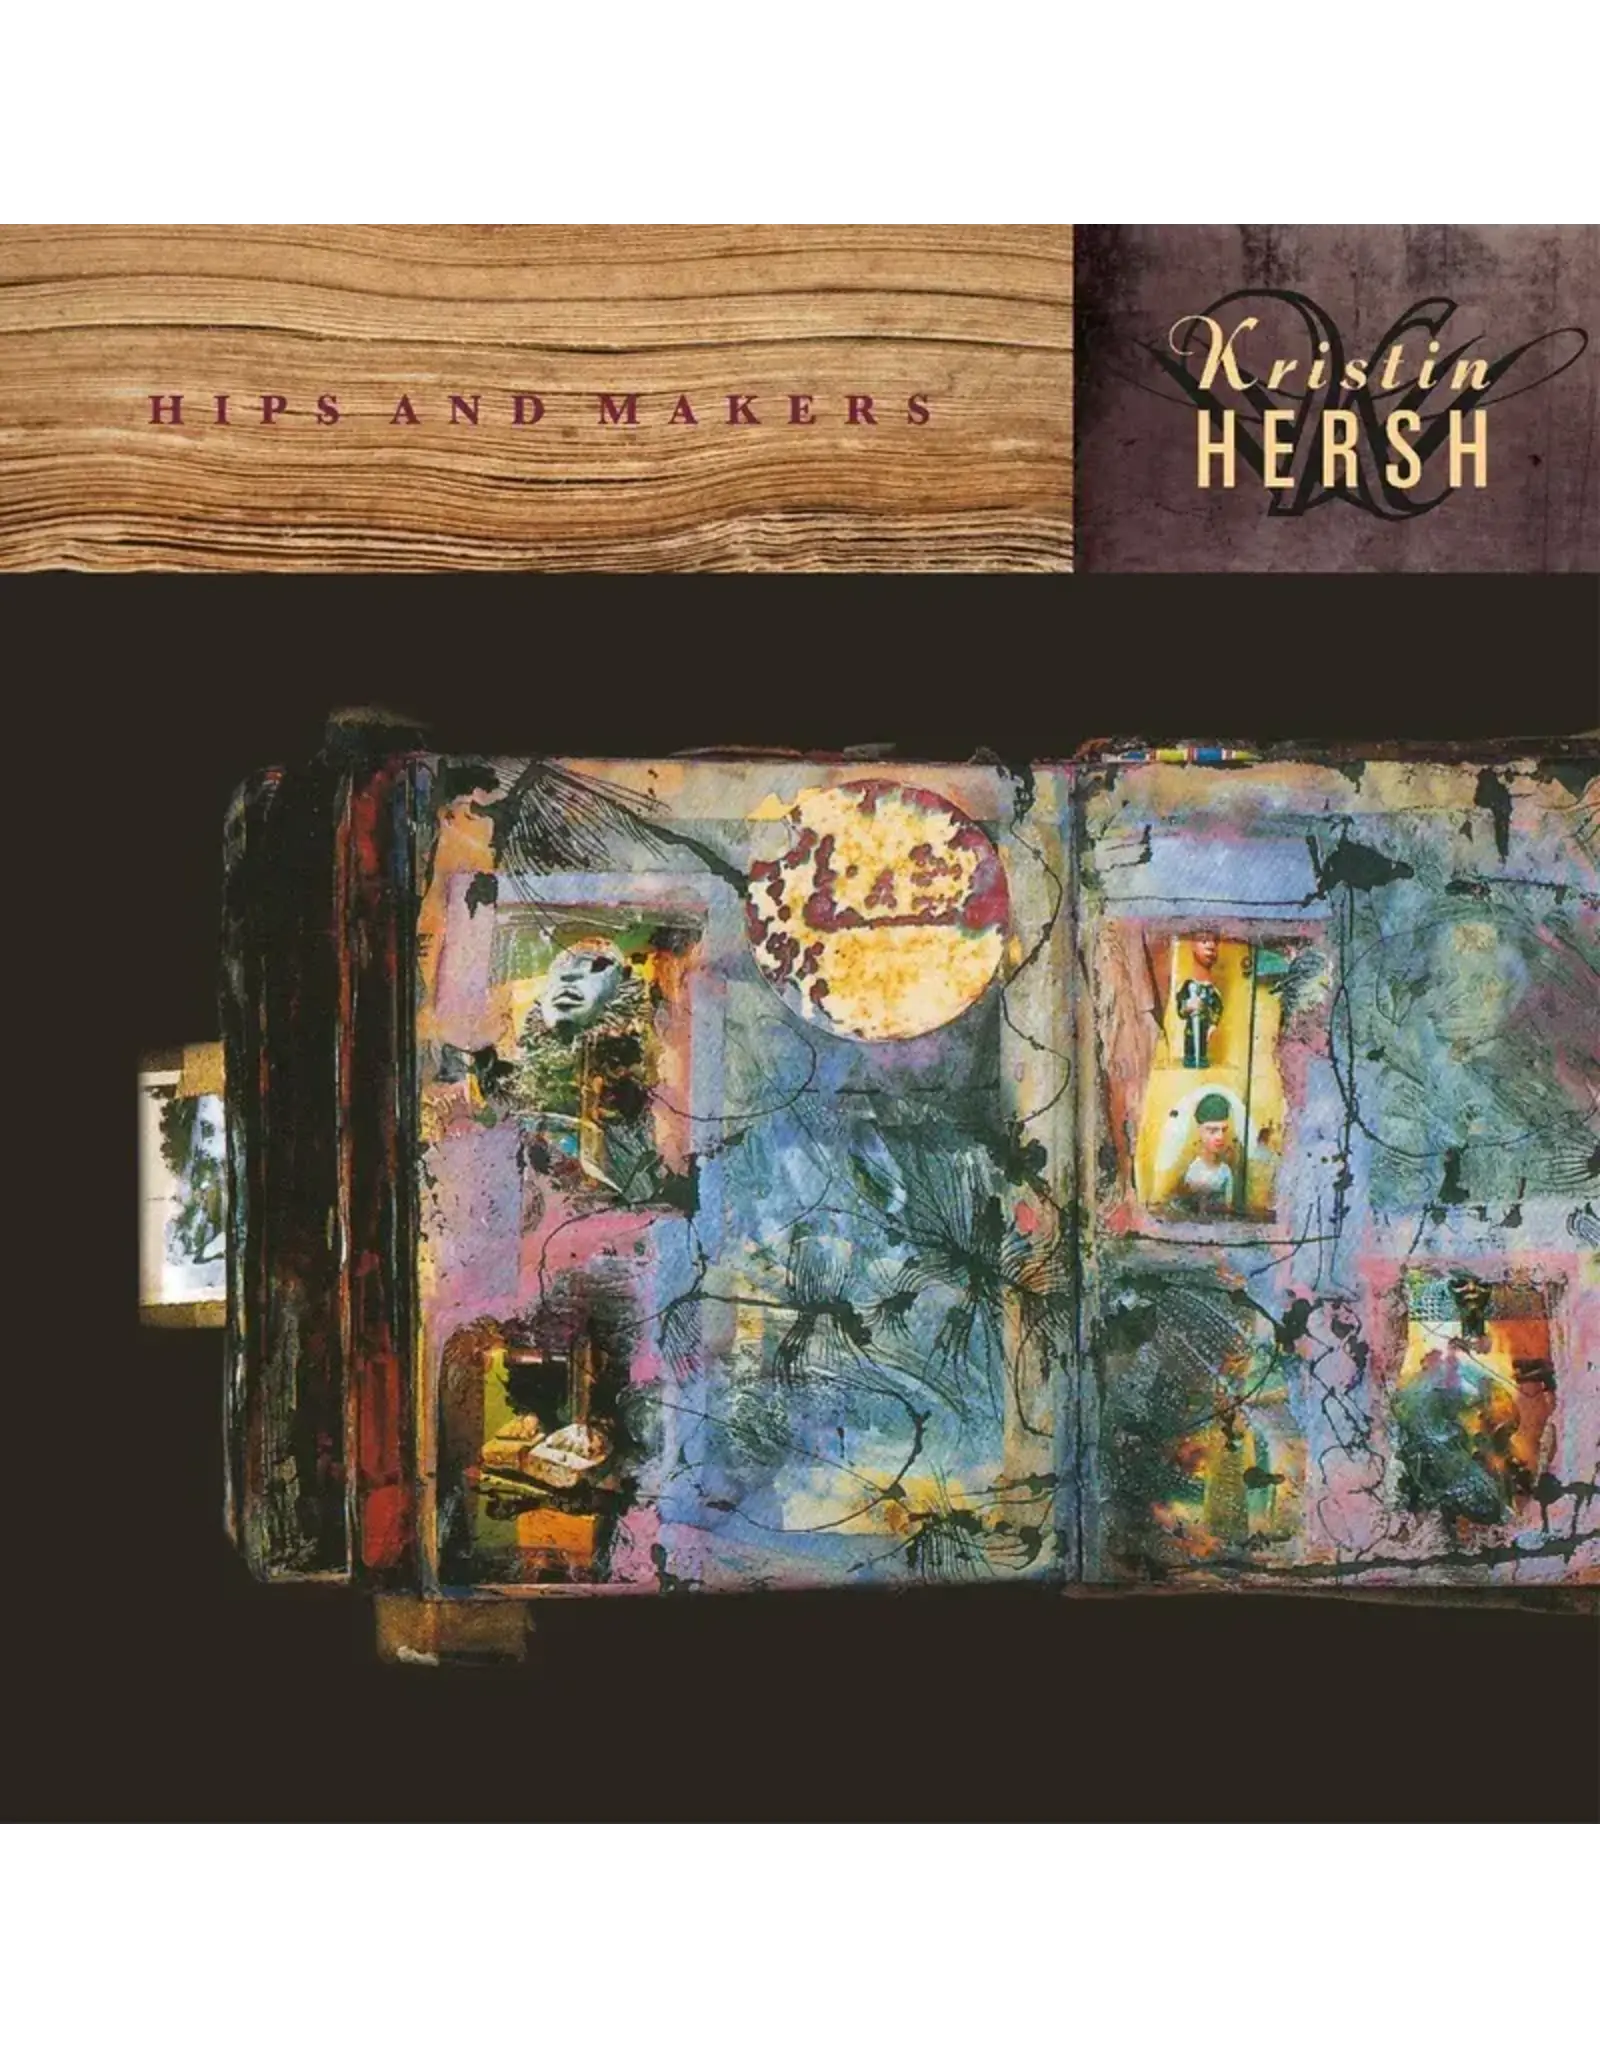 Kristin Hersh -  Hips And Makers (Record Store Day) [30th Anniversary]